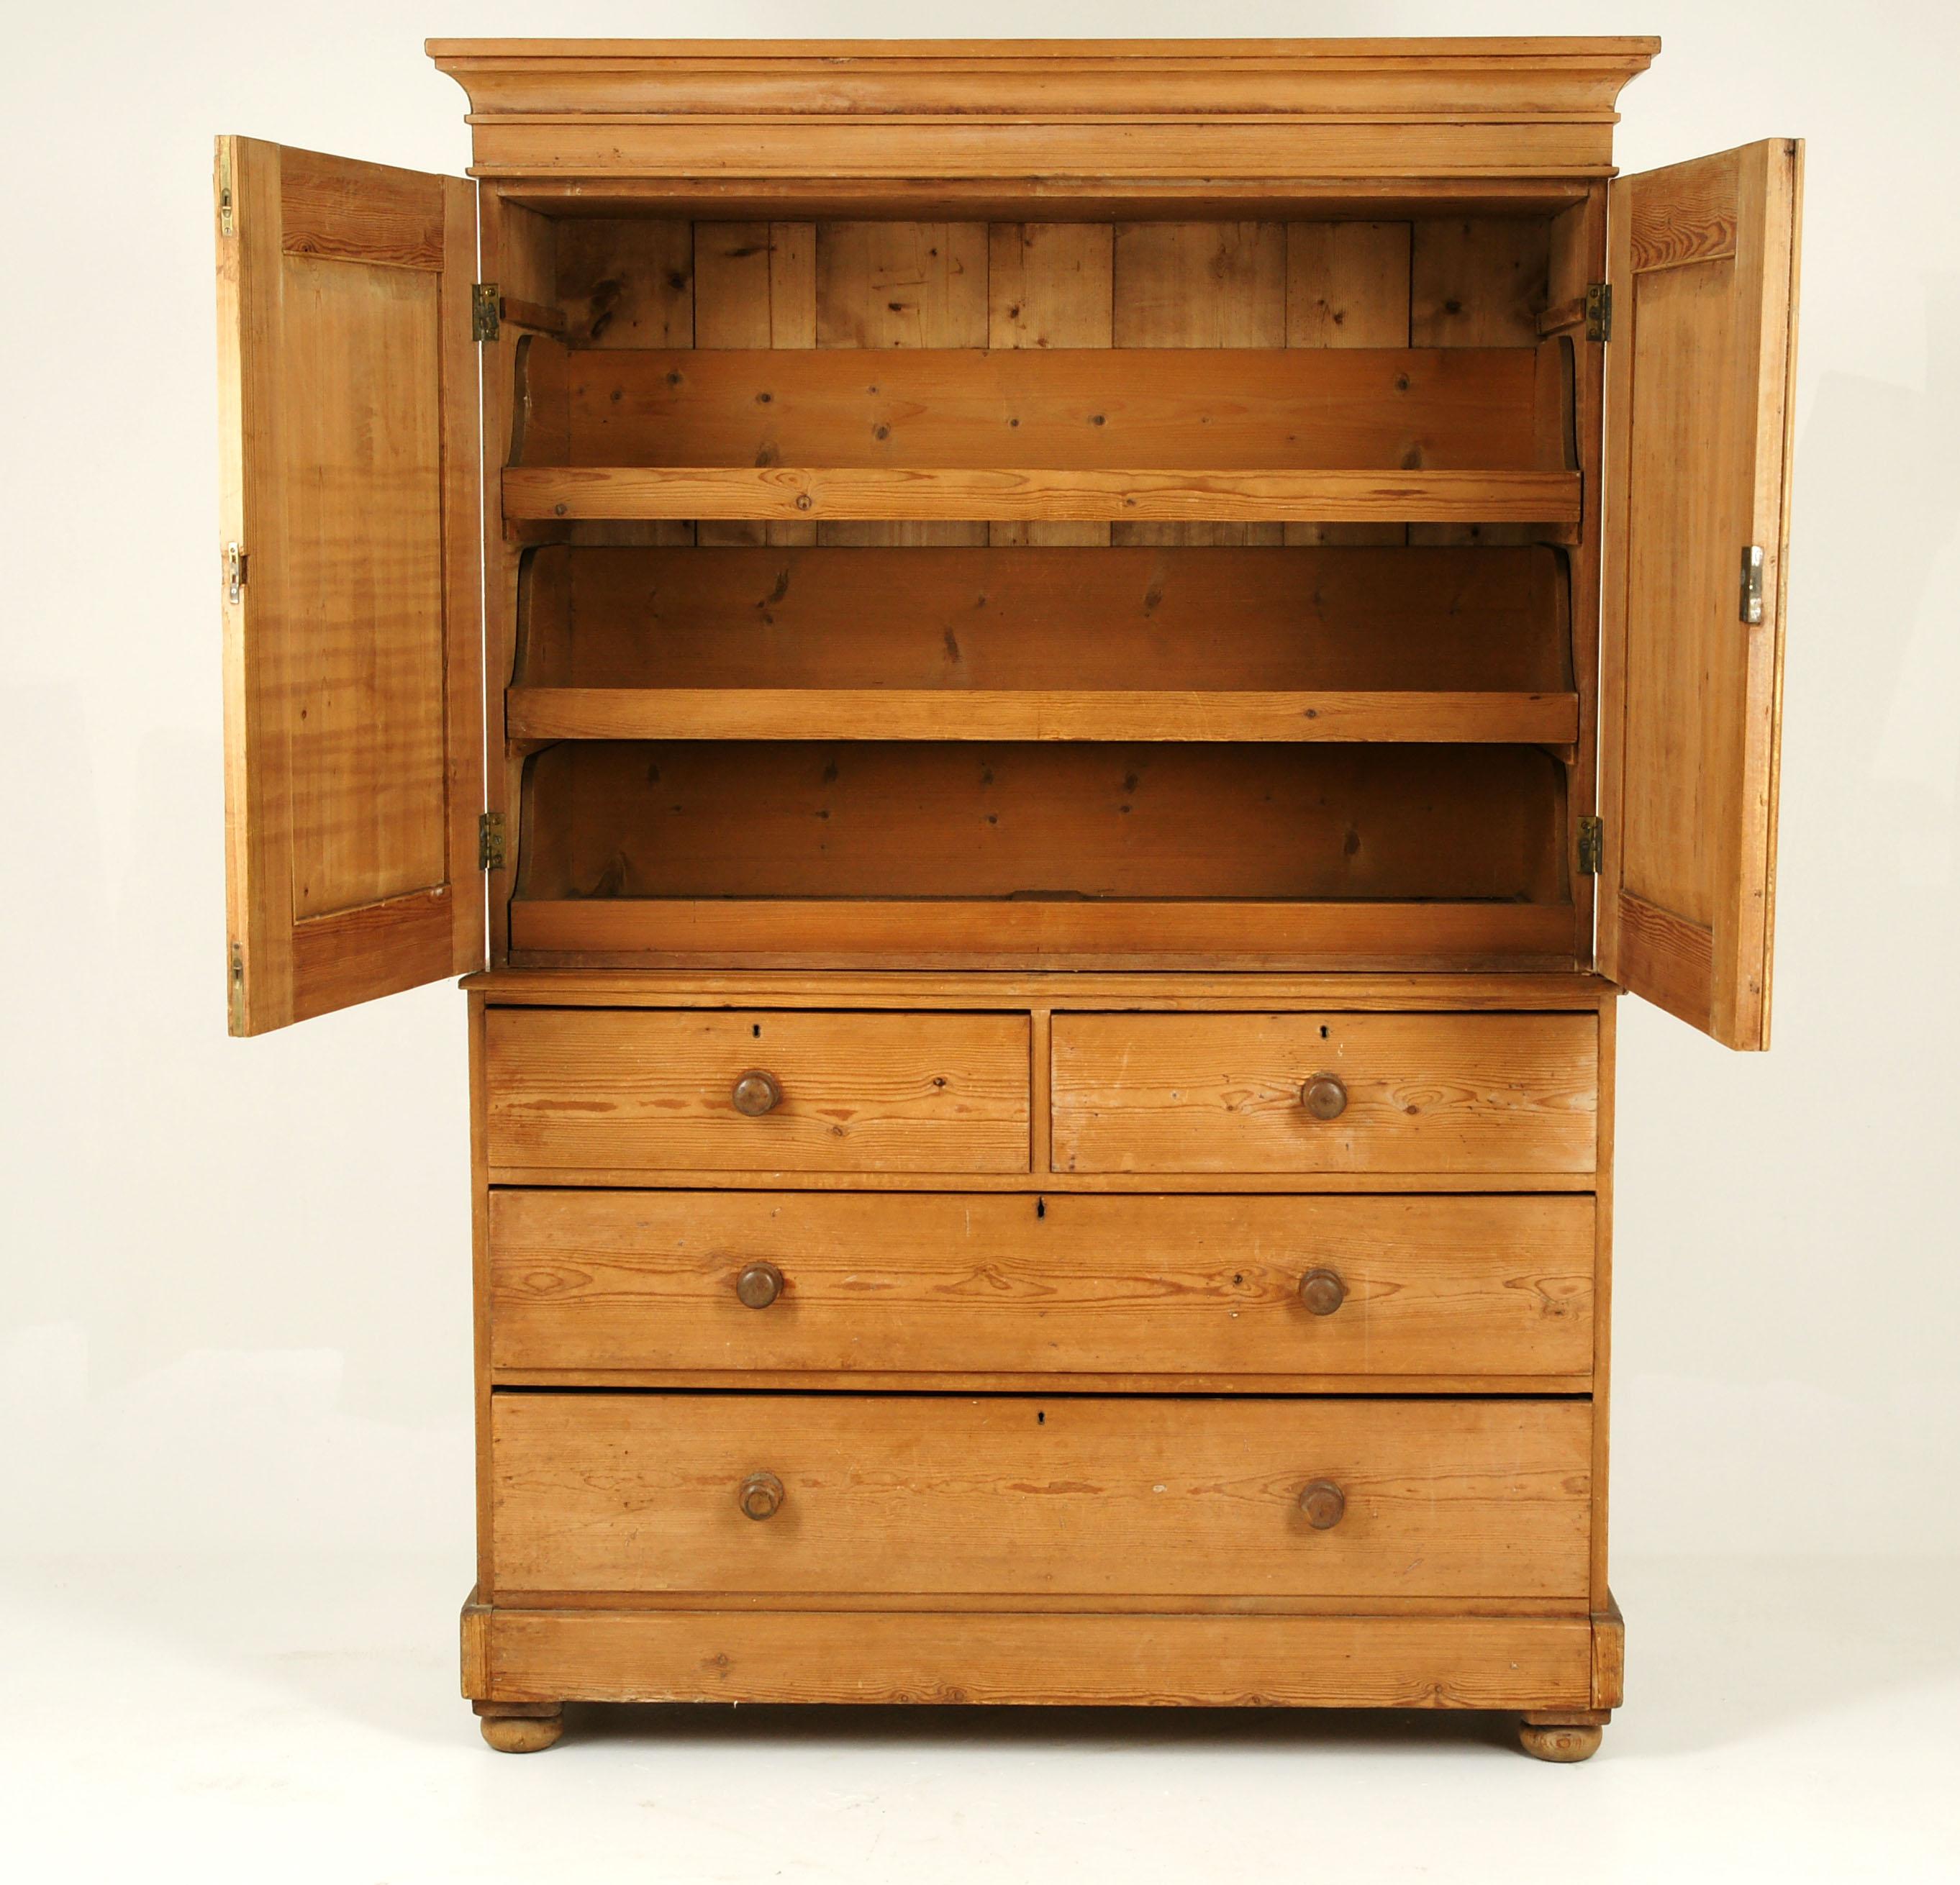 Antique linen press, antique dresser, Victorian, Scotland, 1870, antique furniture

Scotland, 1870
Solid pine
Flared cornice above
Pair of paneled doors
Inside with three original pine slide out shelves
Base has two short dovetailed drawers